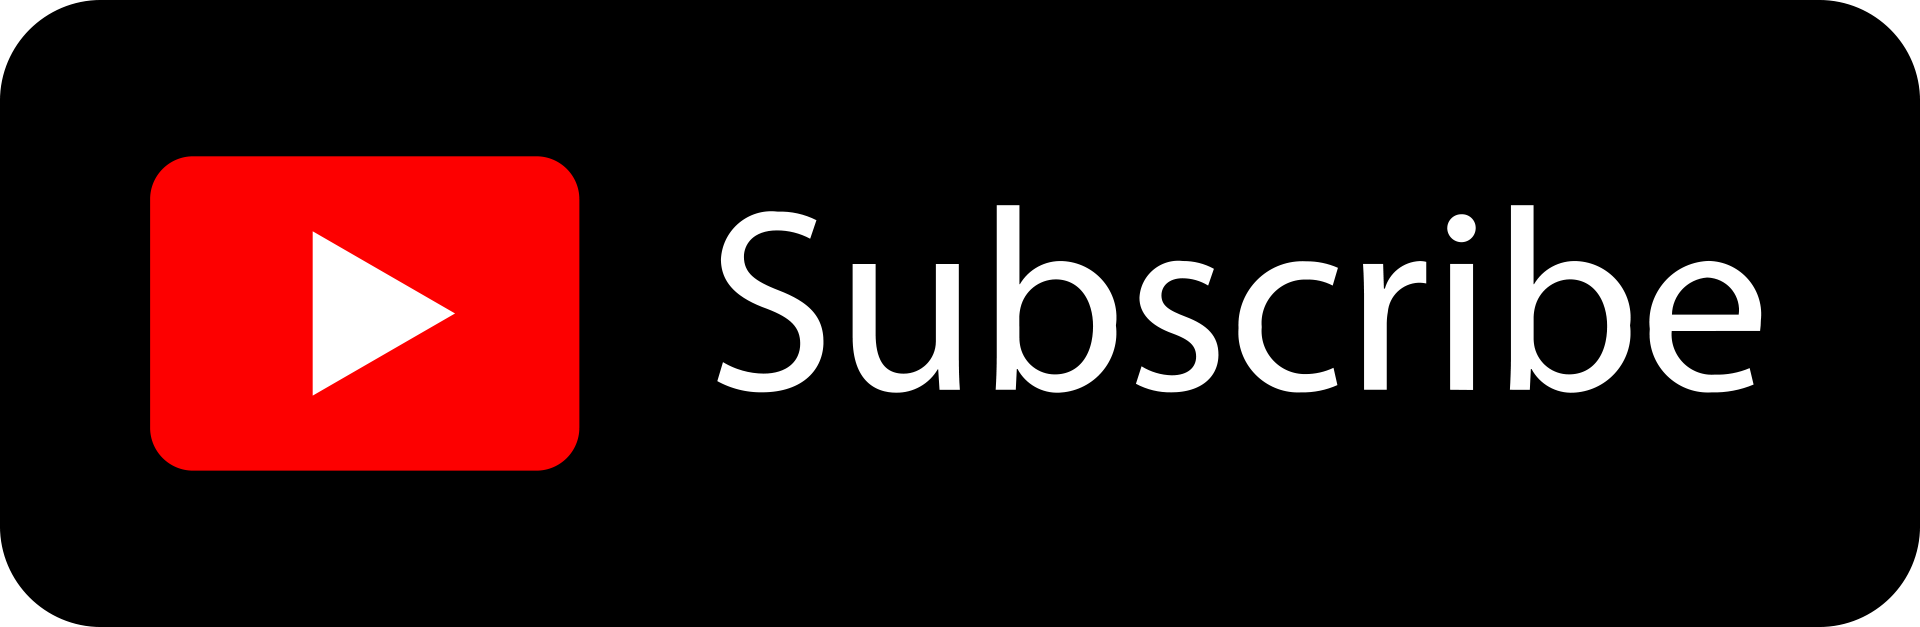 Youtube Subscribe Button Free Download Ui Design Motion Design 2d Art By Alfredocreates